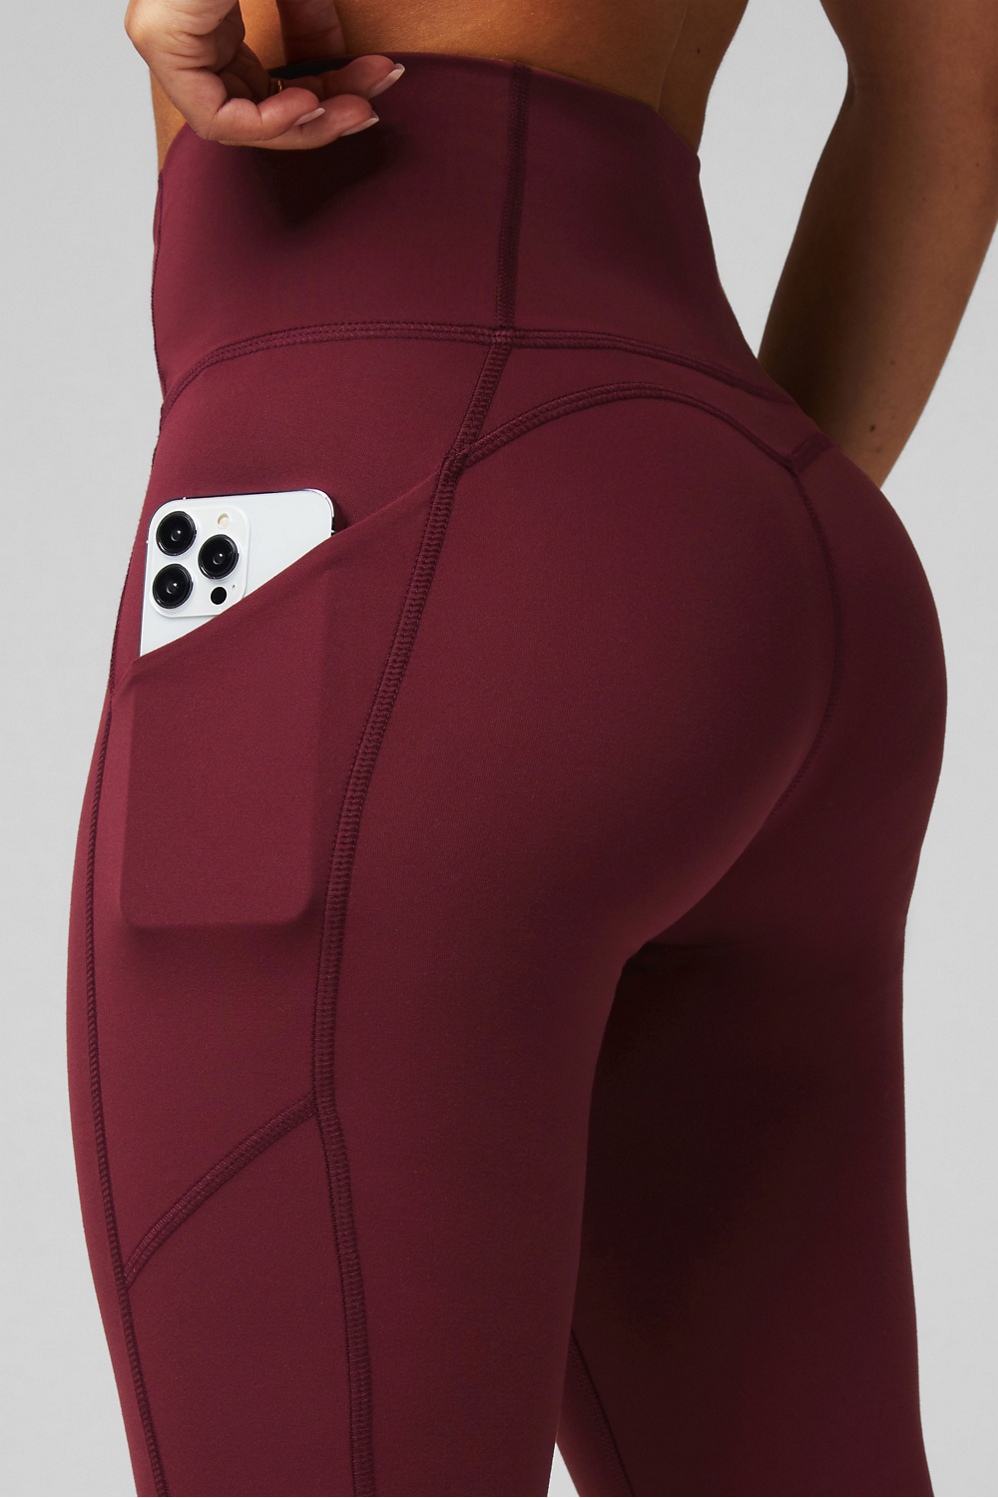 Oasis PureLuxe High-Waisted Twist 7/8 Leggings Fabletics